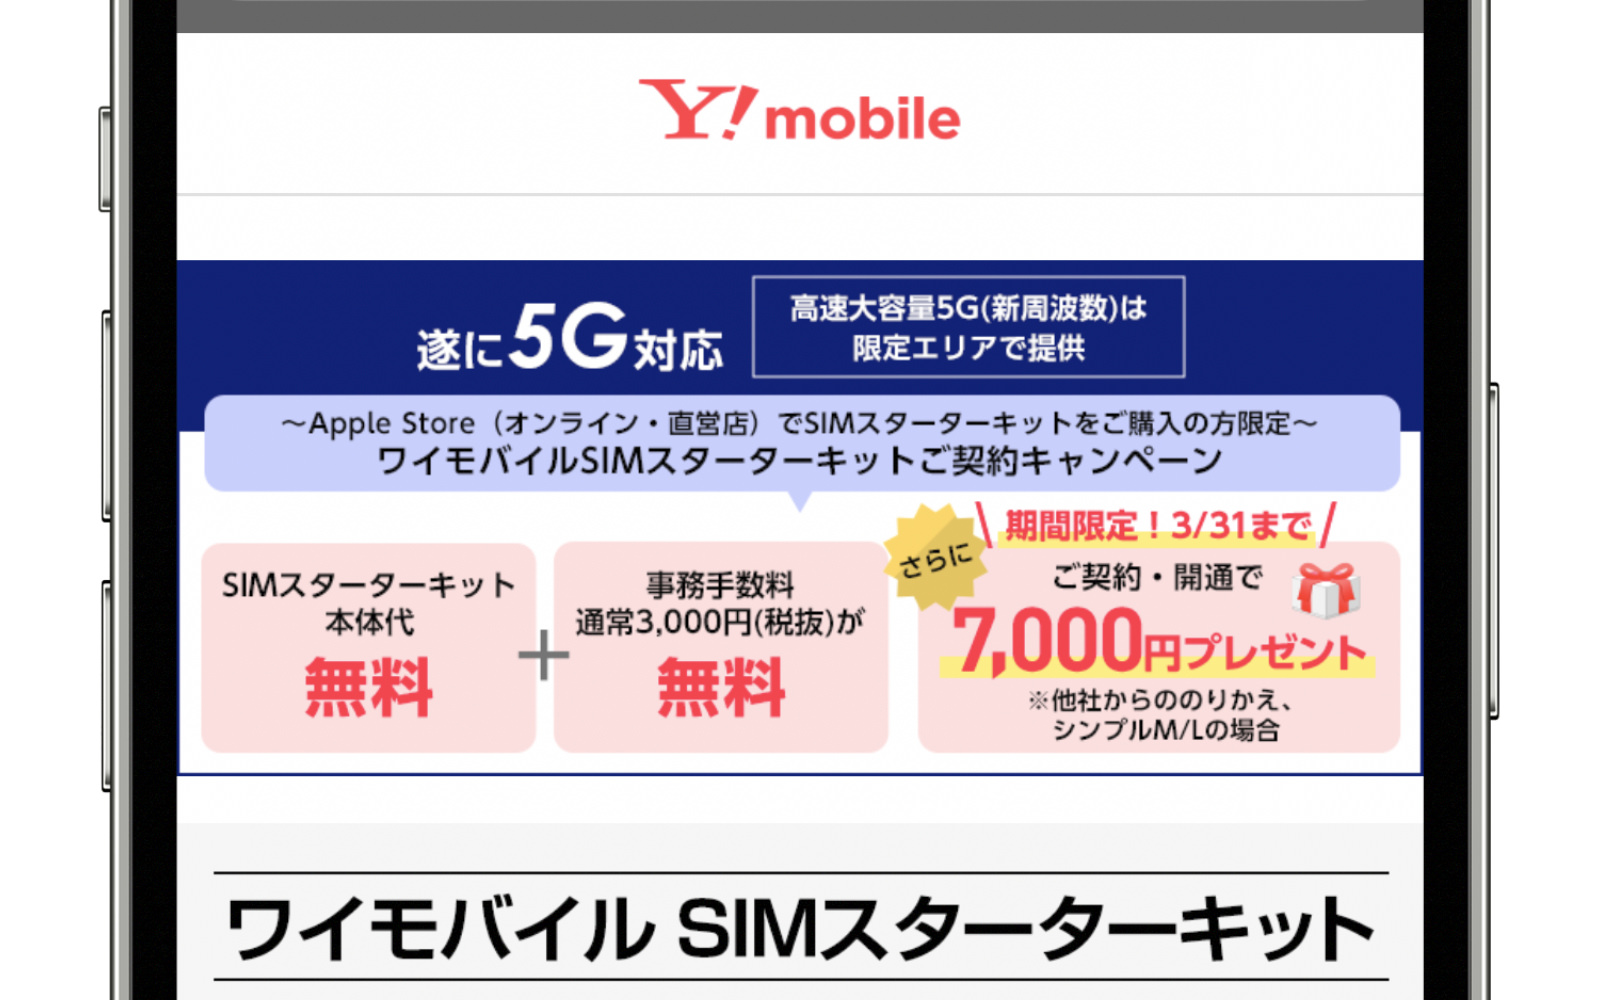 ymobile-iphone-startup-campaign-iphone.jpg